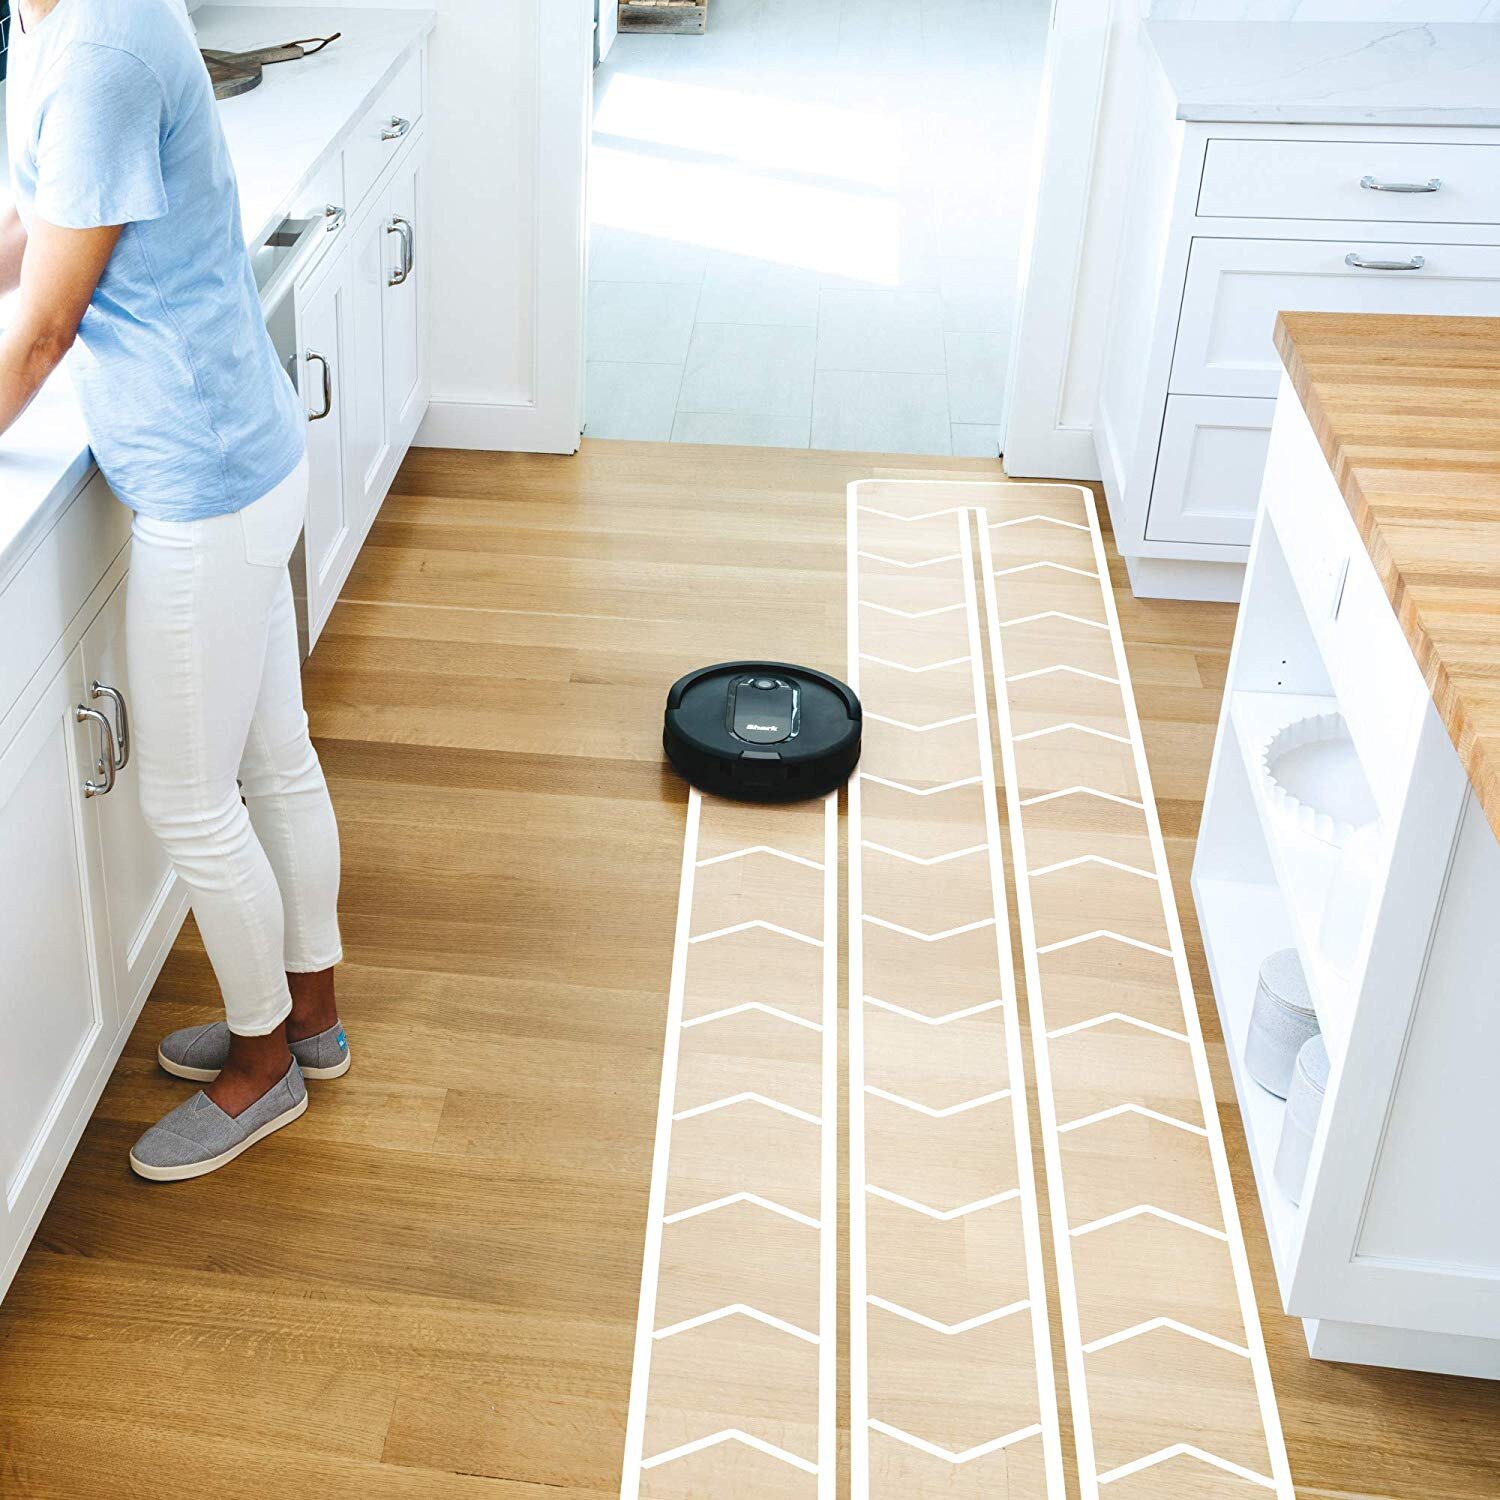 Best Robot Vacuums For Laminate Floors, What Is The Best Vacuum For Laminate Floors